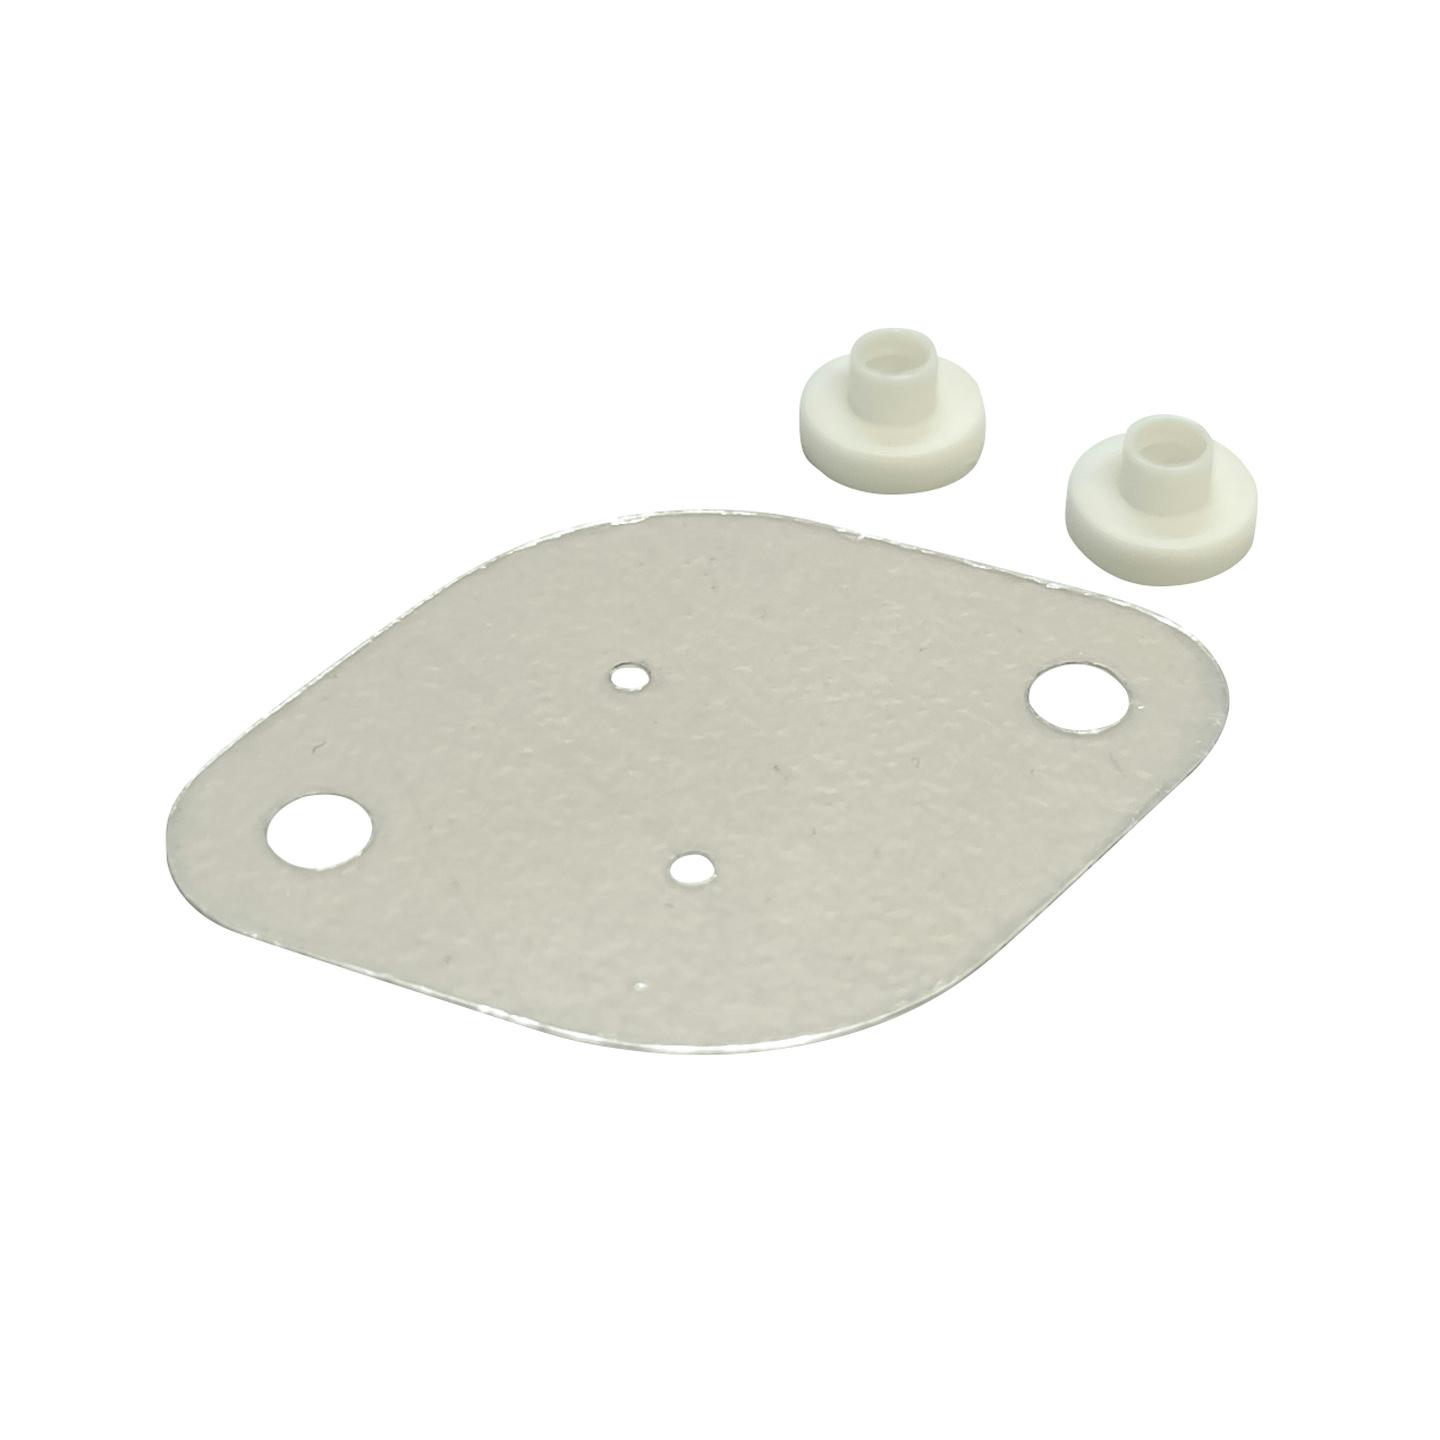 TO-3 Mica Transistor Insulating Washers - Pack of 4